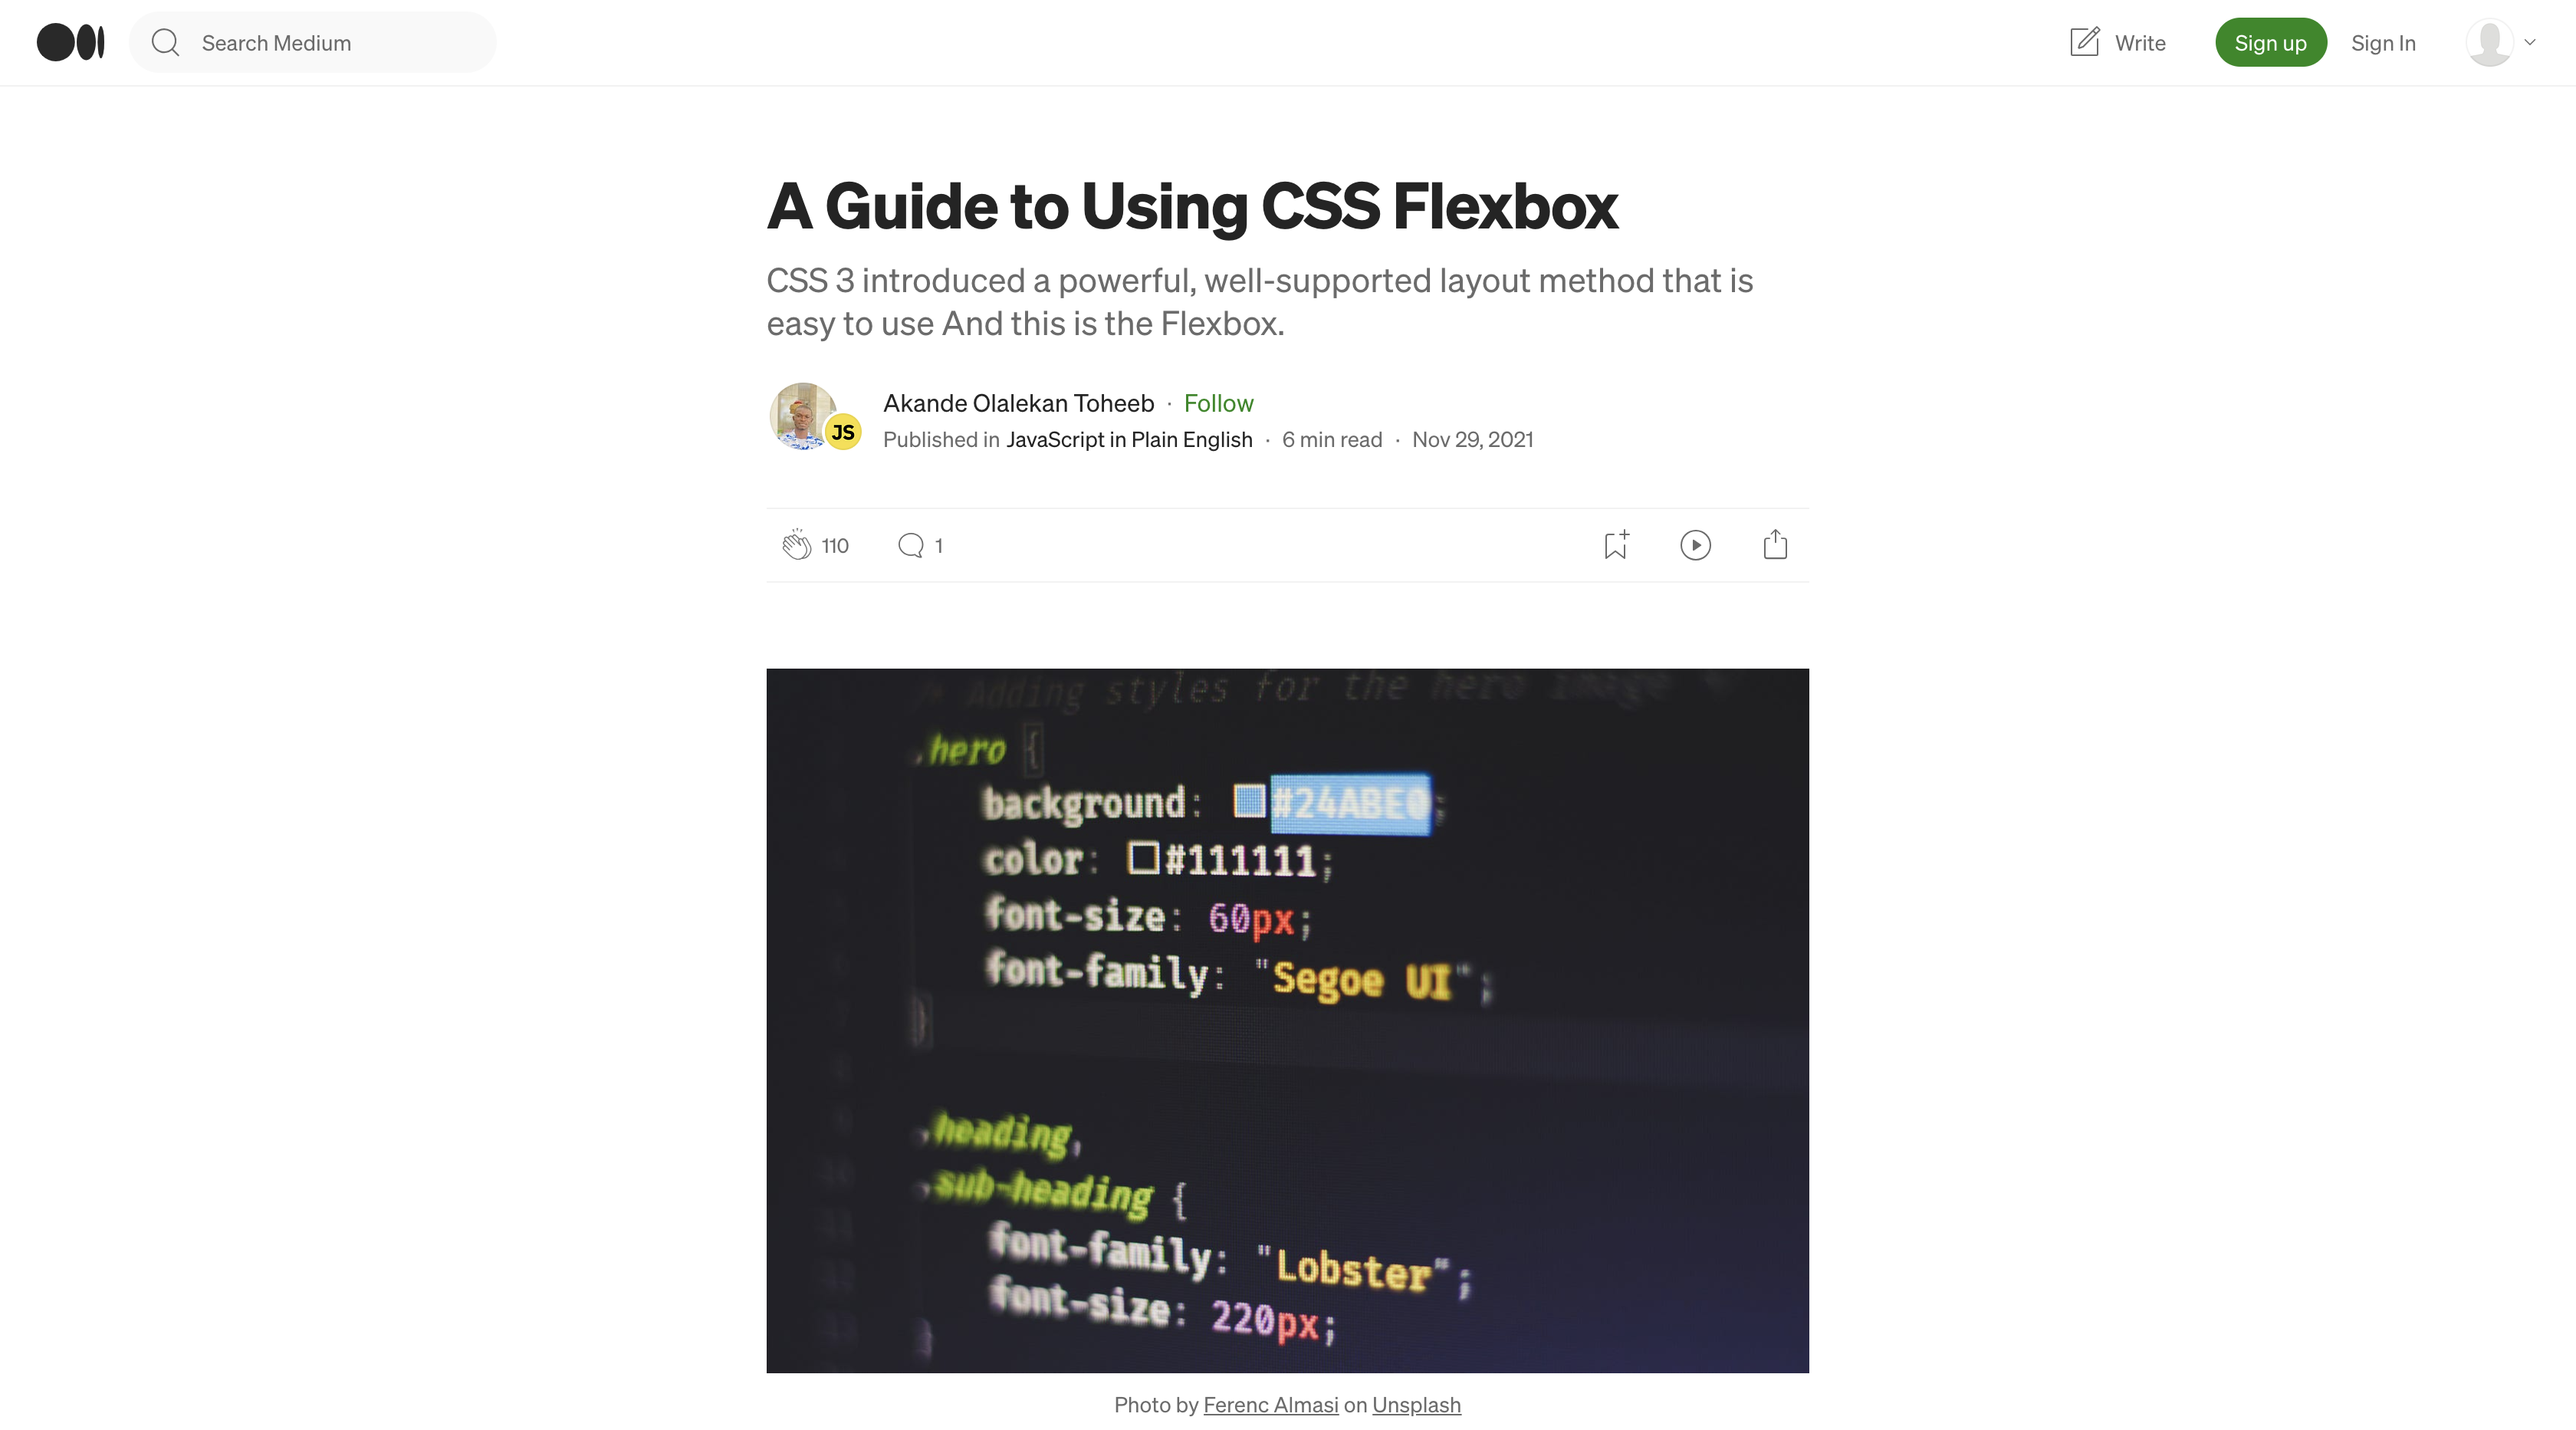 A Guide to Using CSS Flexbox